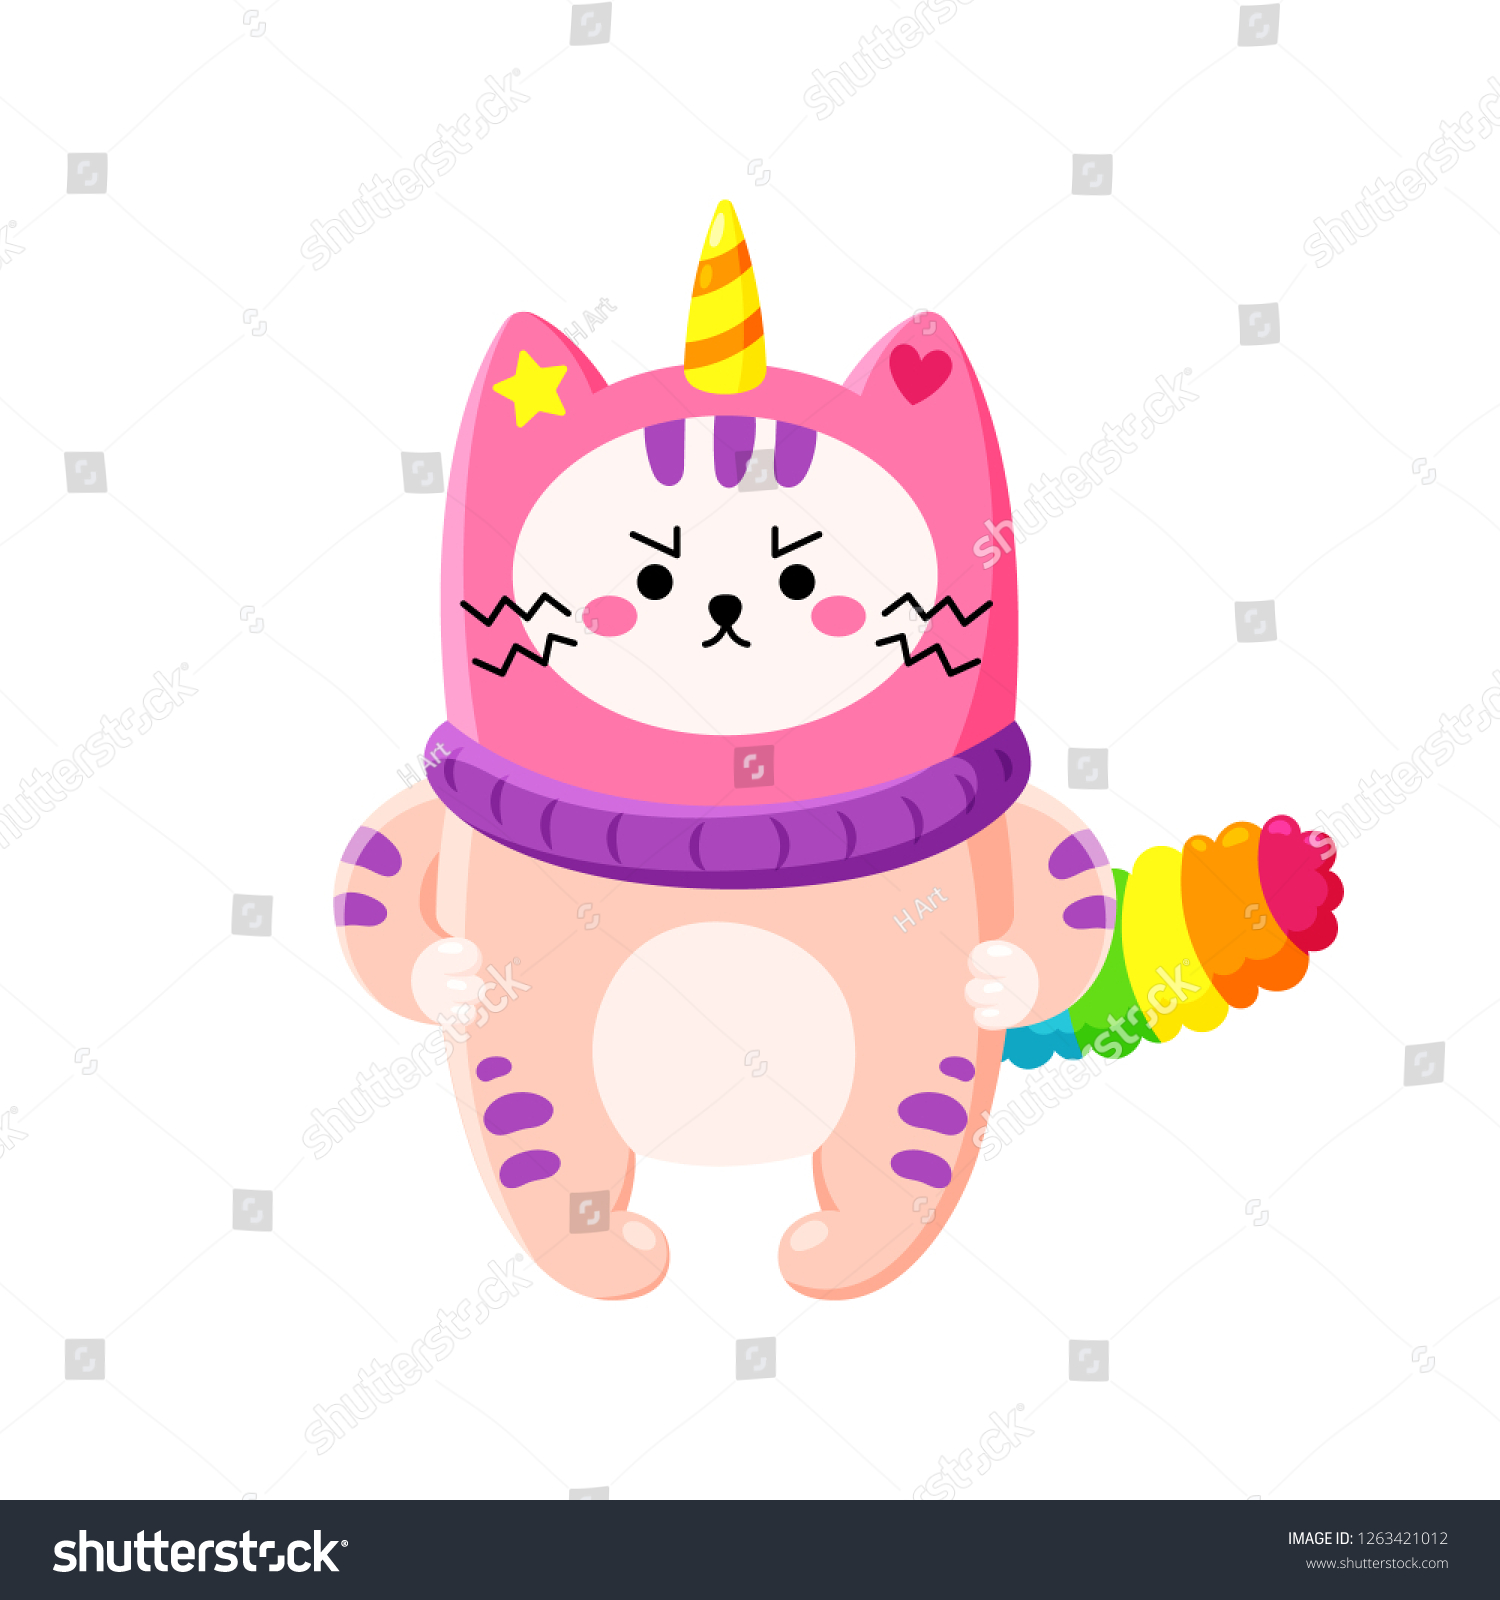 SVG of Cute cartoon vector doodle cat. Kitten in a unicorn hat. Magic character. Template for greeting cards, design, textiles. Unhappy angry cat svg